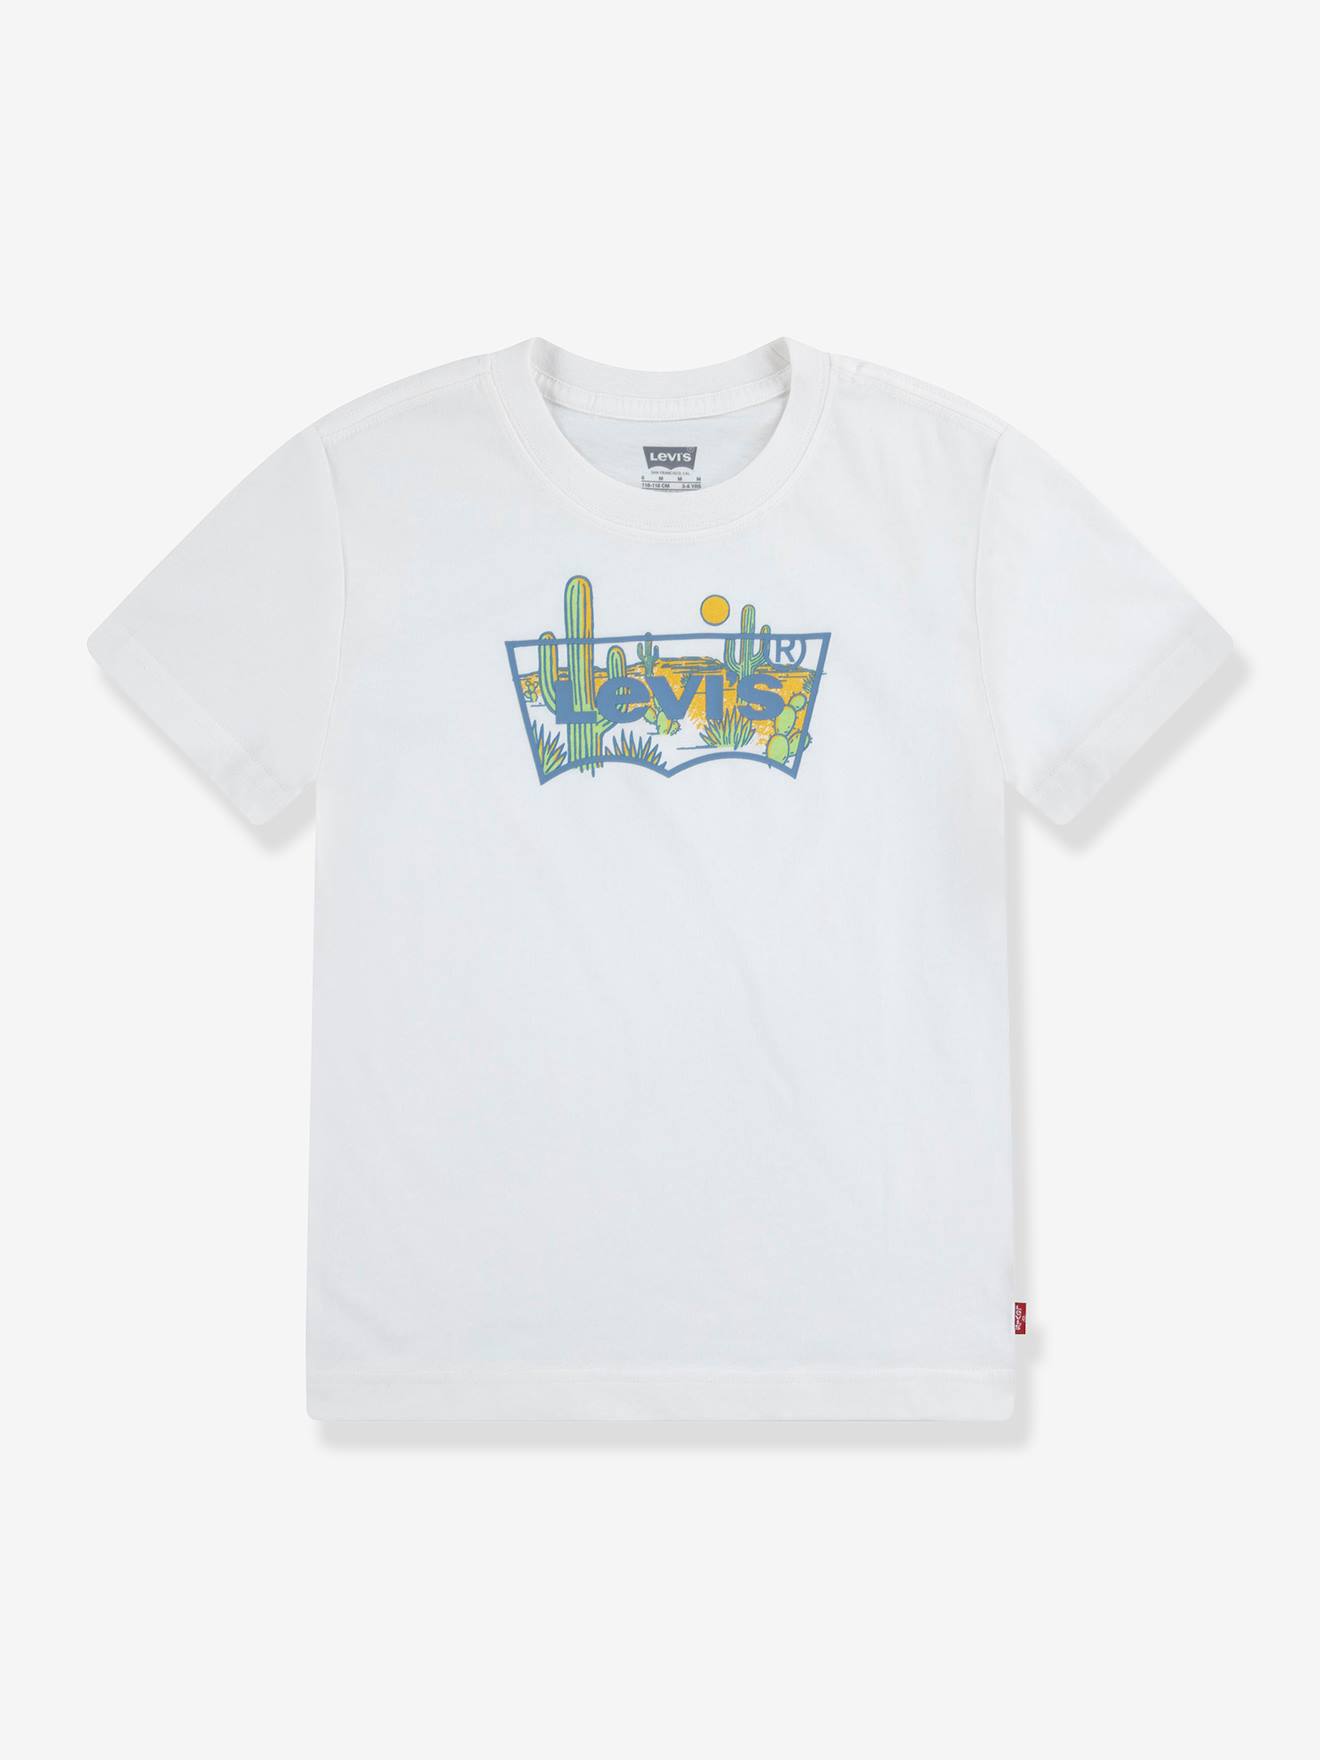 Printed T-Shirt by Levi’s(r) for Boys grey blue